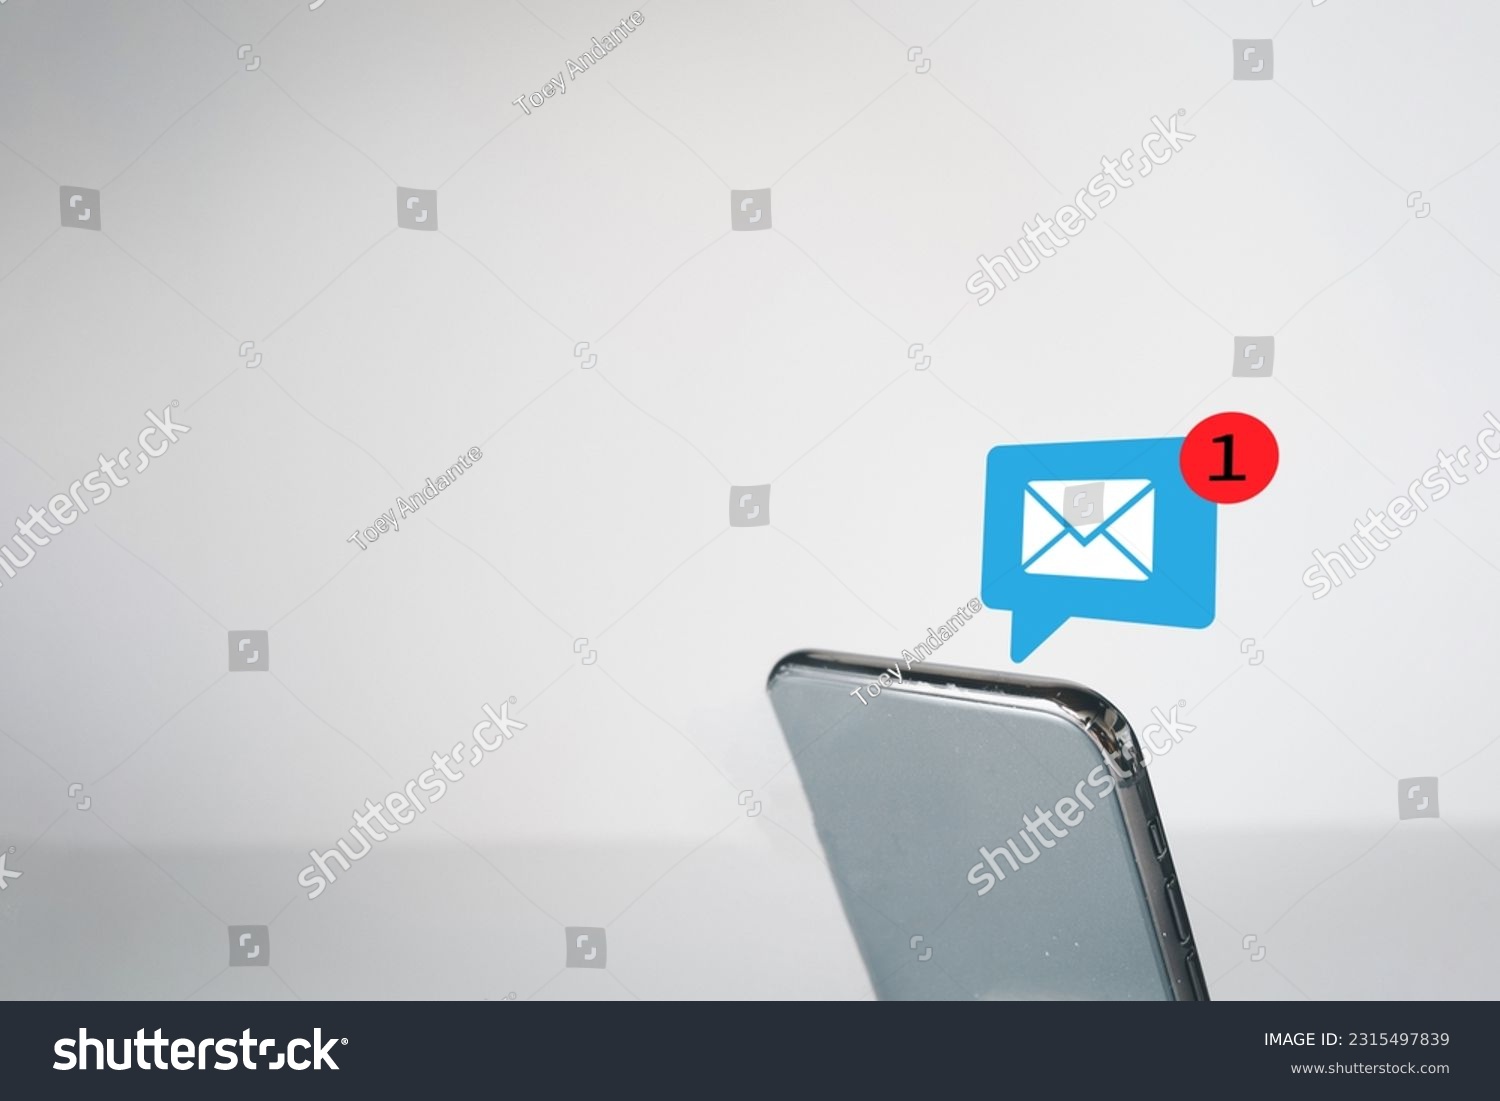 Email notification,New message,Reminder notification,Social Media concept.,New Email or New Message icon on smartphone over white background use for technology,Communications idea. #2315497839